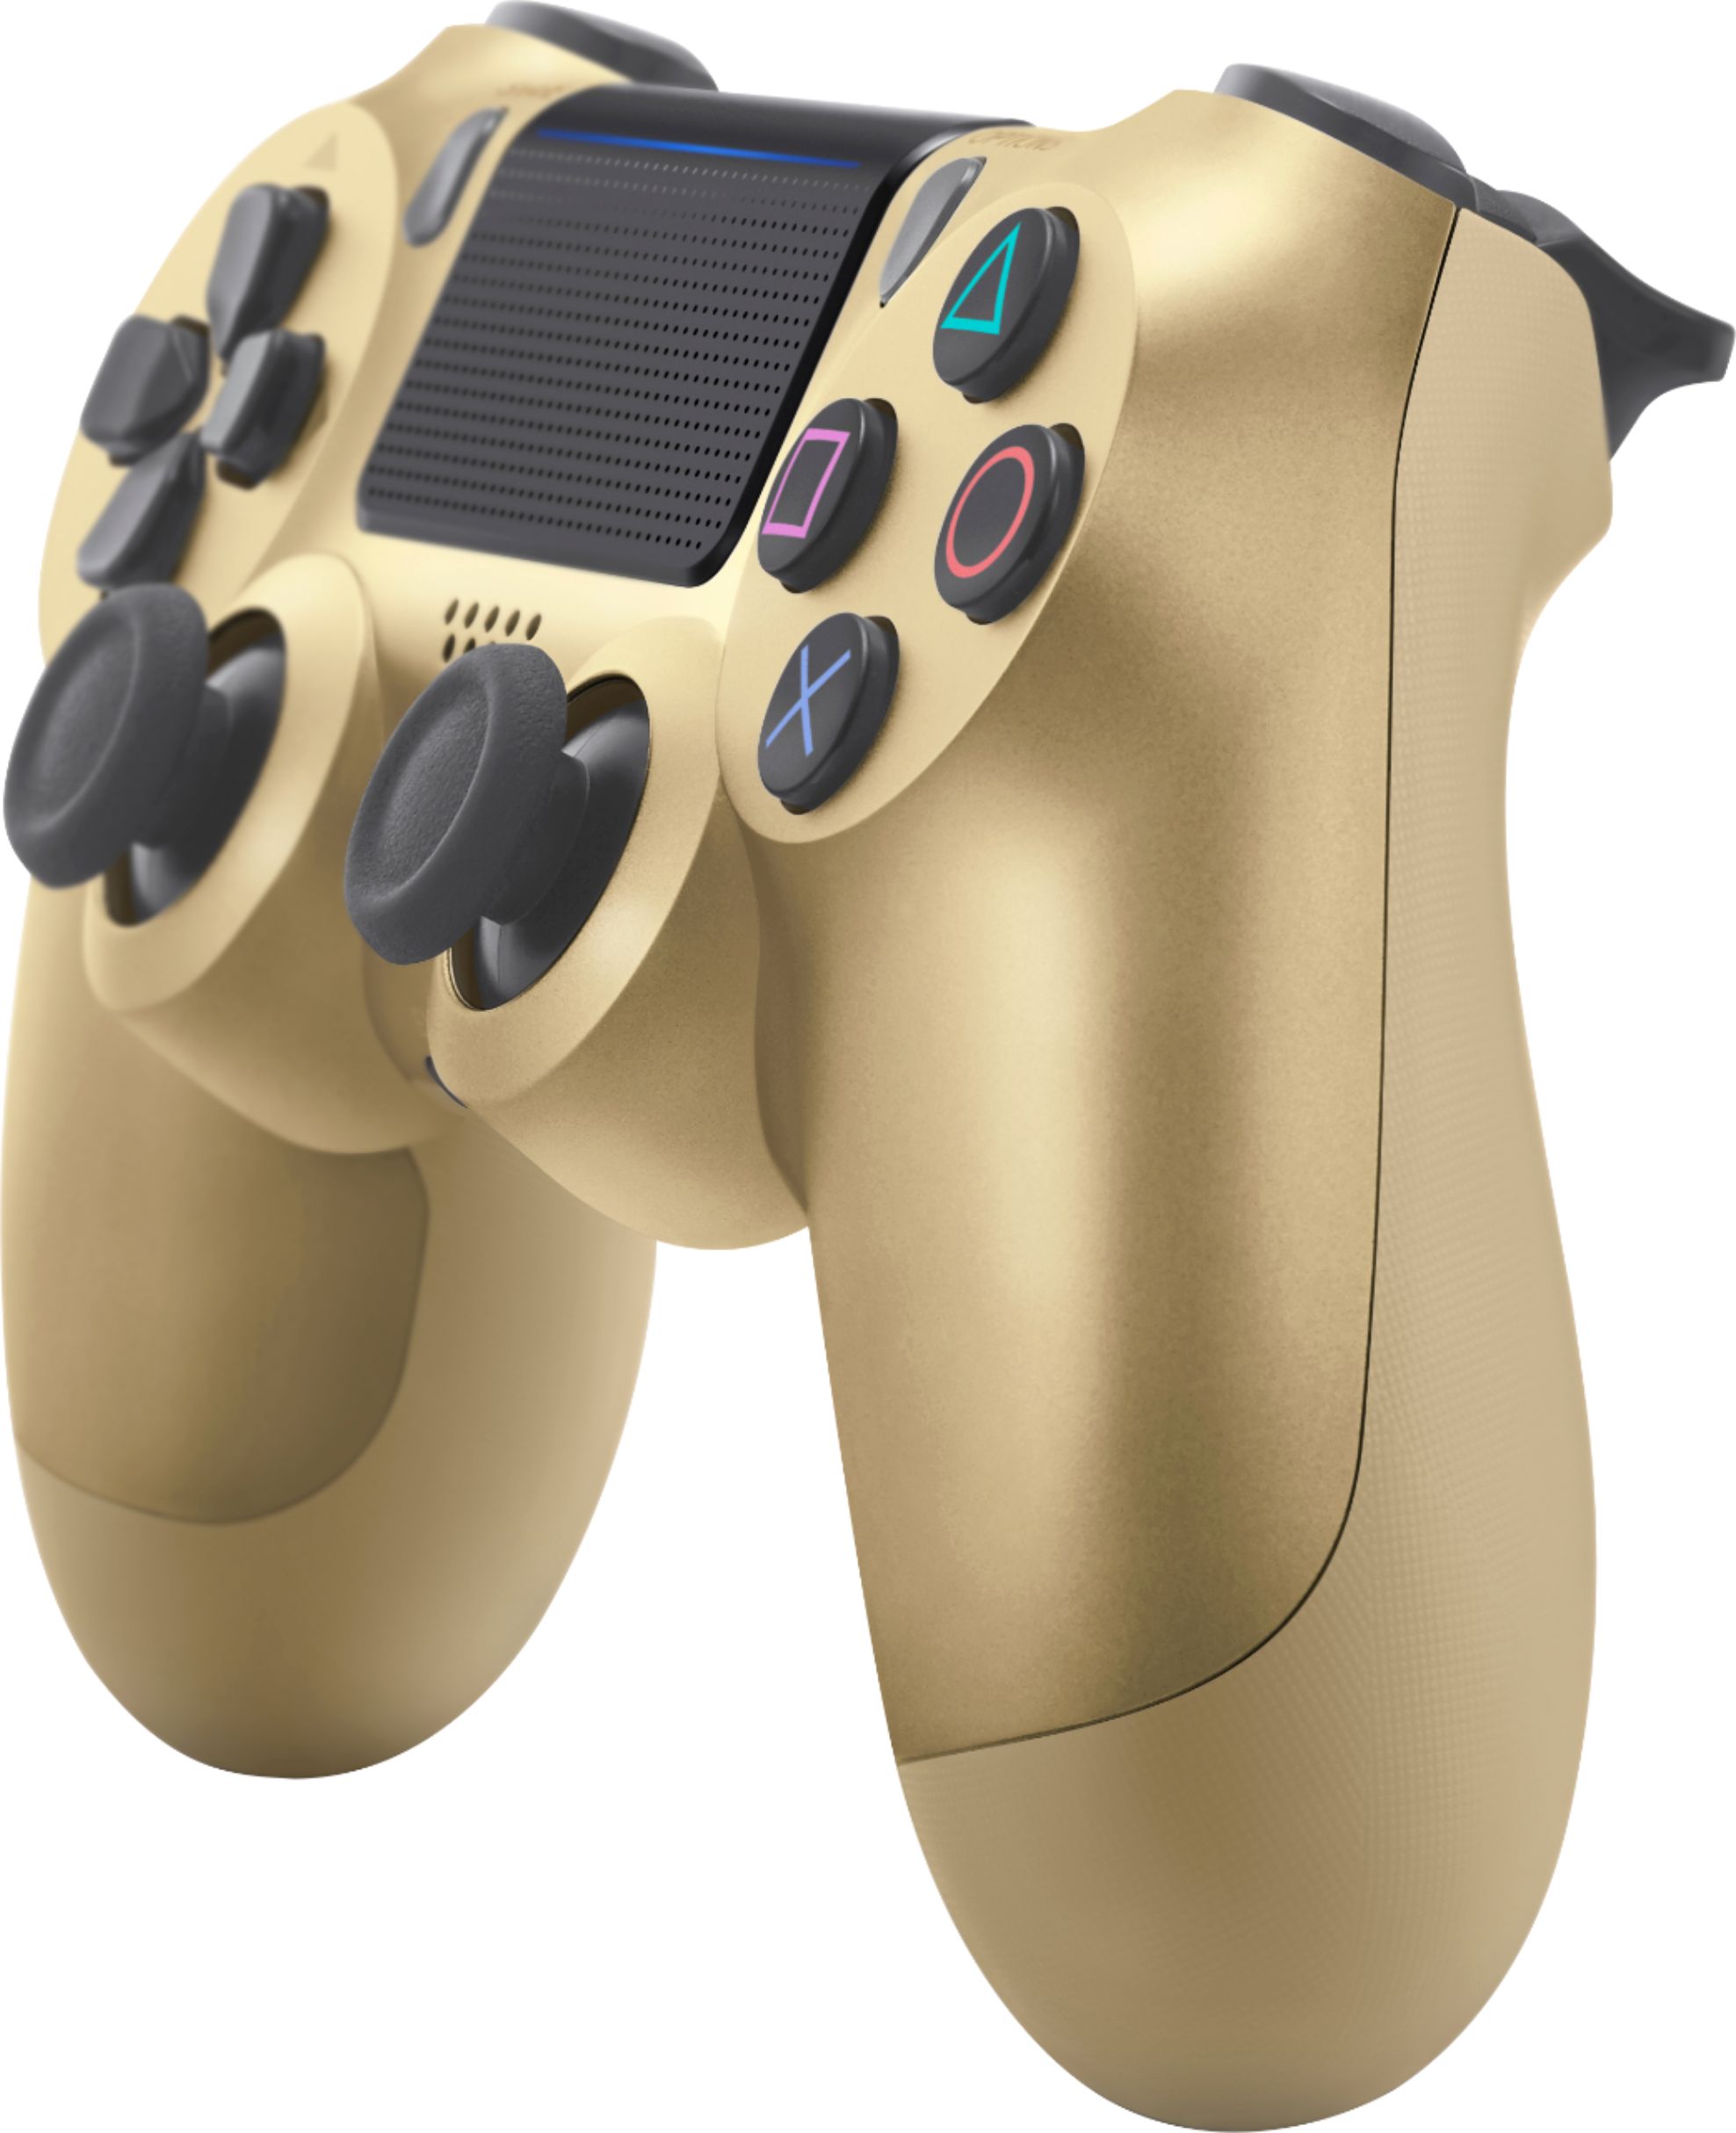 Left View: Sony - Geek Squad Certified Refurbished DualShock 4 Wireless Controller for PlayStation 4 - Gold